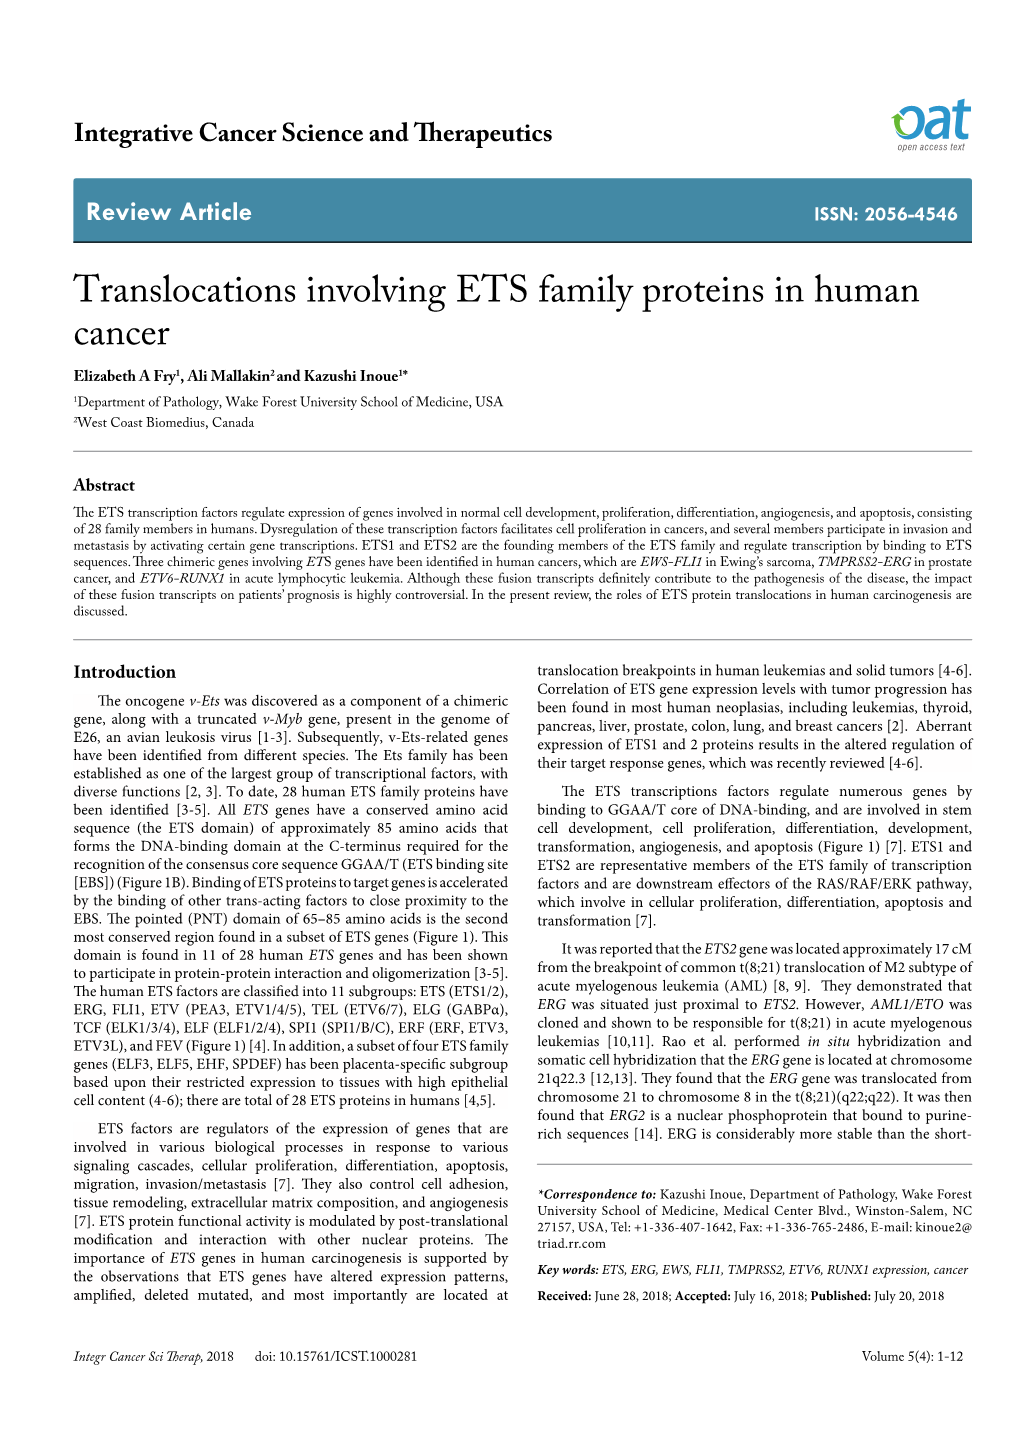 Translocations Involving ETS Family Proteins in Human Cancer